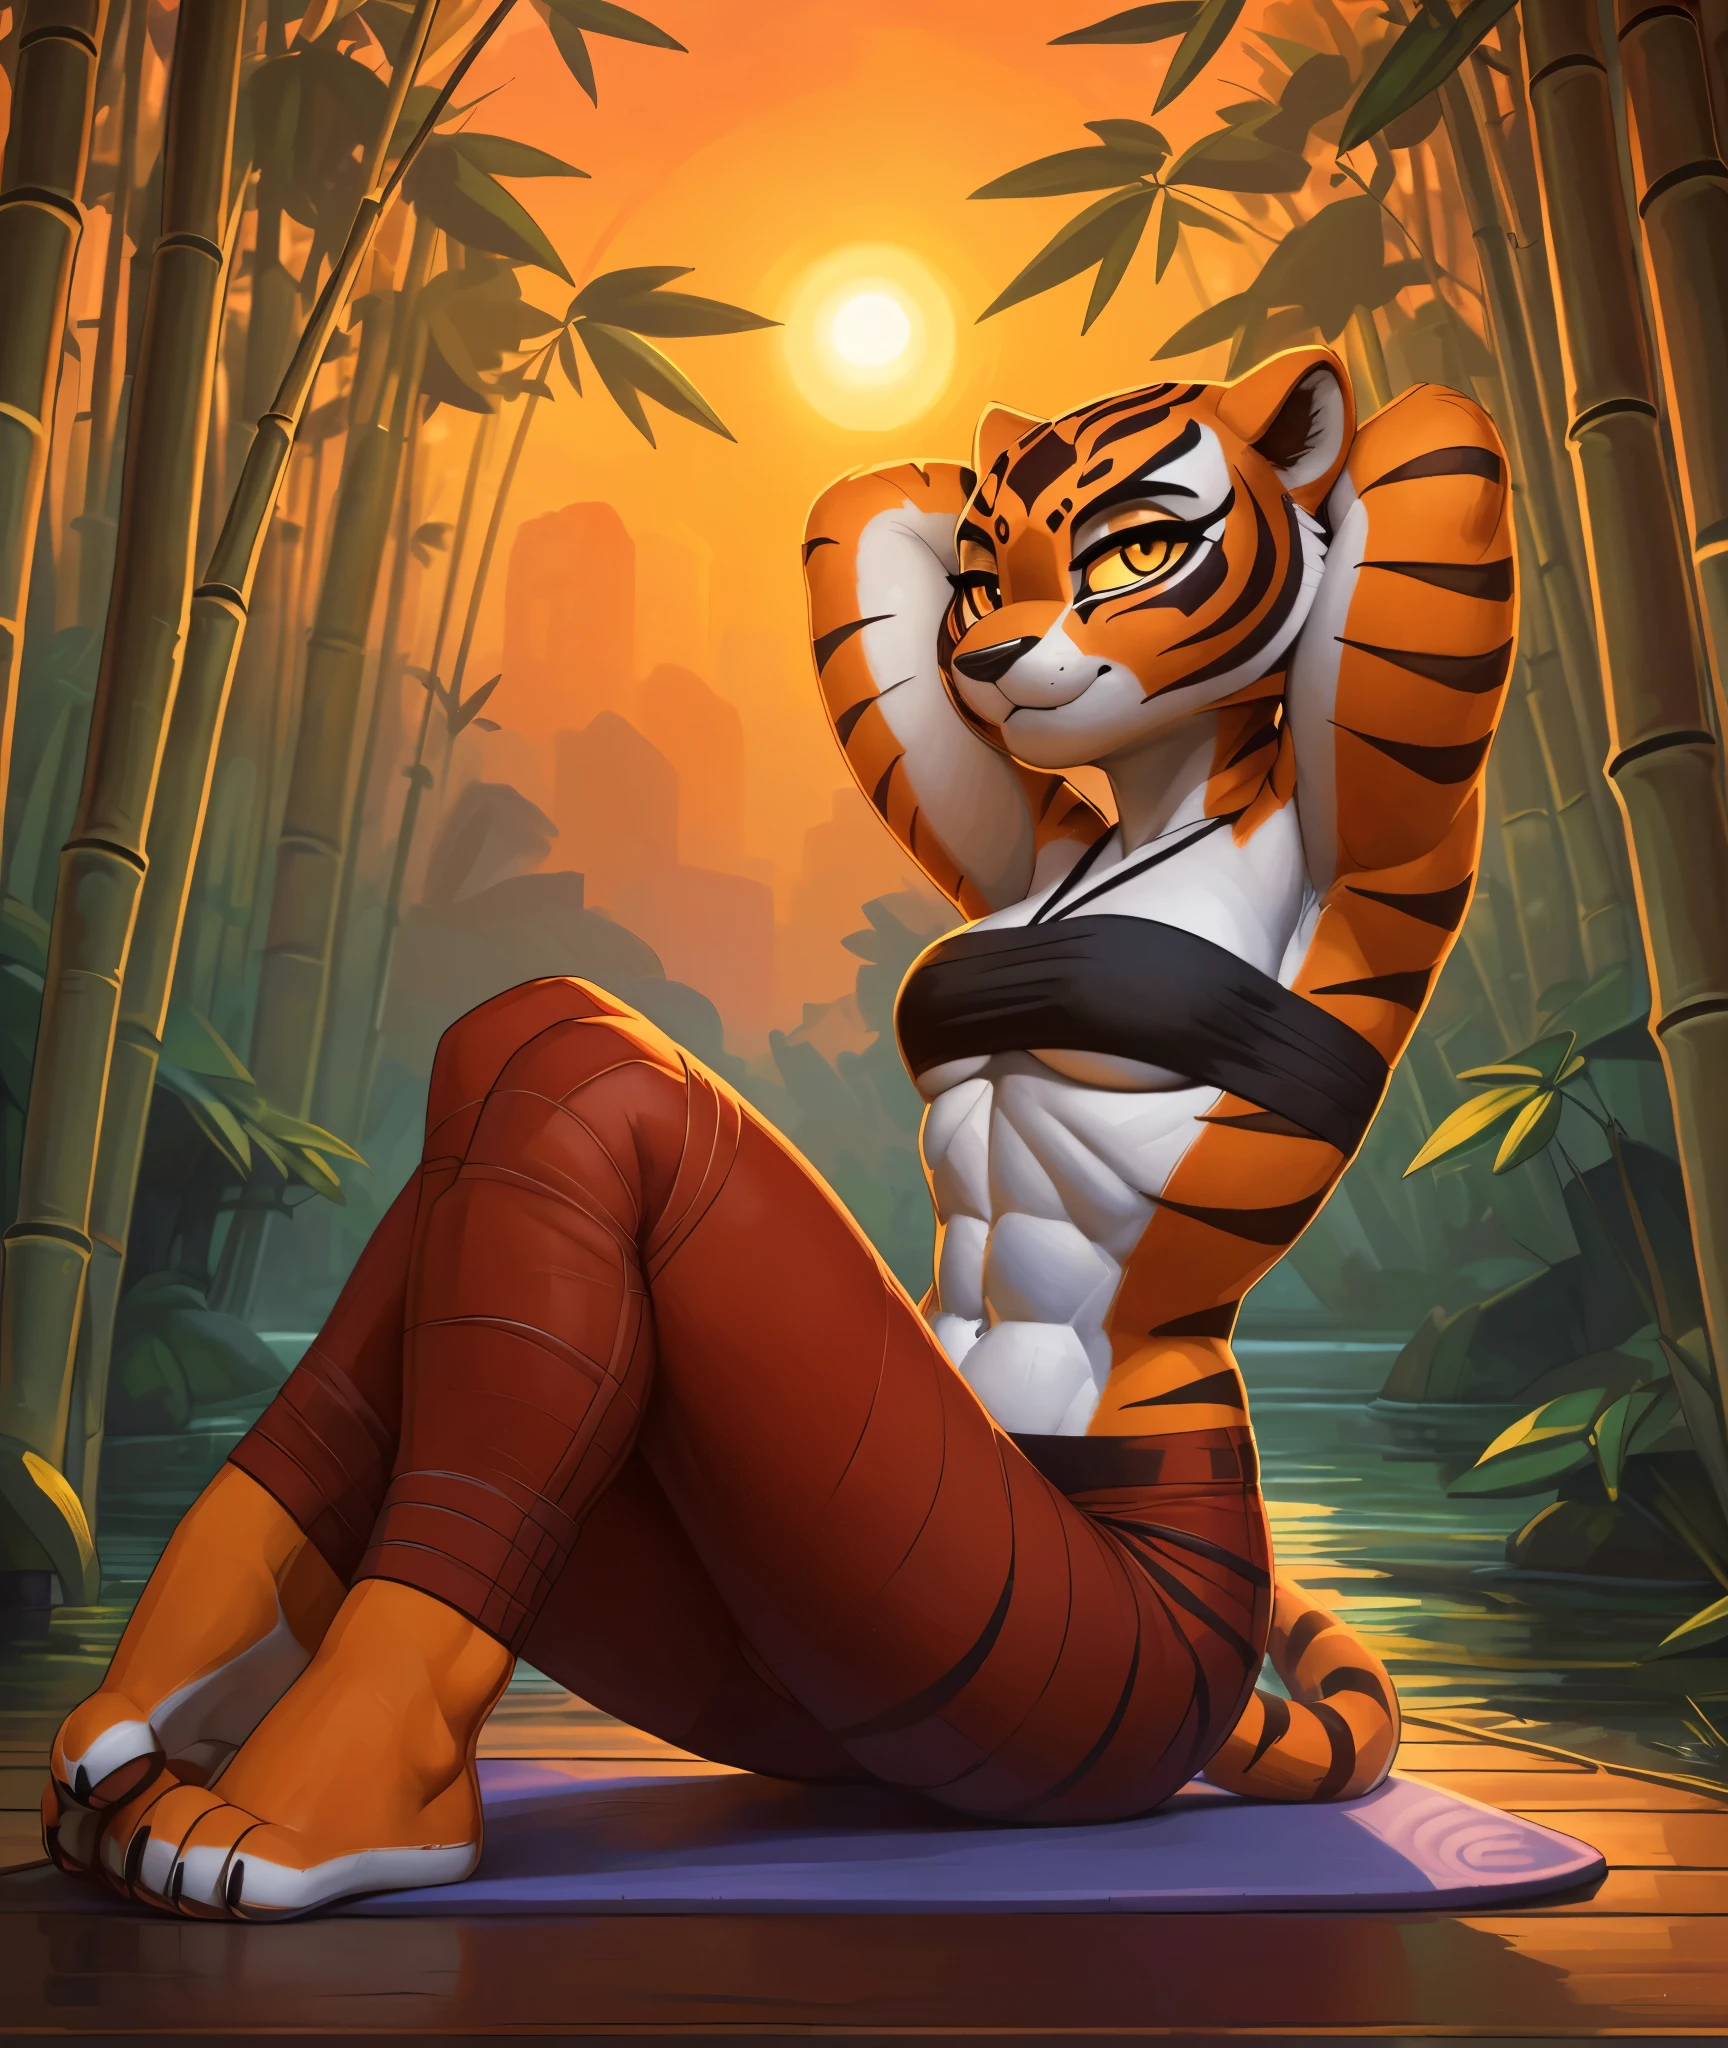 [master tigress], [Uploaded to e621.net; (Pixelsketcher), (wamudraws)], ((masterpiece)), ((HD)), ((solo portrait)), ((full body)), ((side view)), ((feet visible)), ((furry; anthro)), ((detailed fur)), ((detailed shading)), ((beautiful render art)), ((intricate details)), {anthro tiger; (orange fur), ((black stripes), black nose, (cute yellow eyes), (short eyelashes), (curvy hips), (defined abs), (beautiful legs), (beautiful paws), (expressionless)}, {(white bandage bandeau), (bandages a-crossed chest), (red yoga pants)}, {(on yoga mat), (sitting), (hands behind head), (looking at viewer)}, [background; (bamboo forest), (river), (sunrise), (orange sky), (sun rays)]